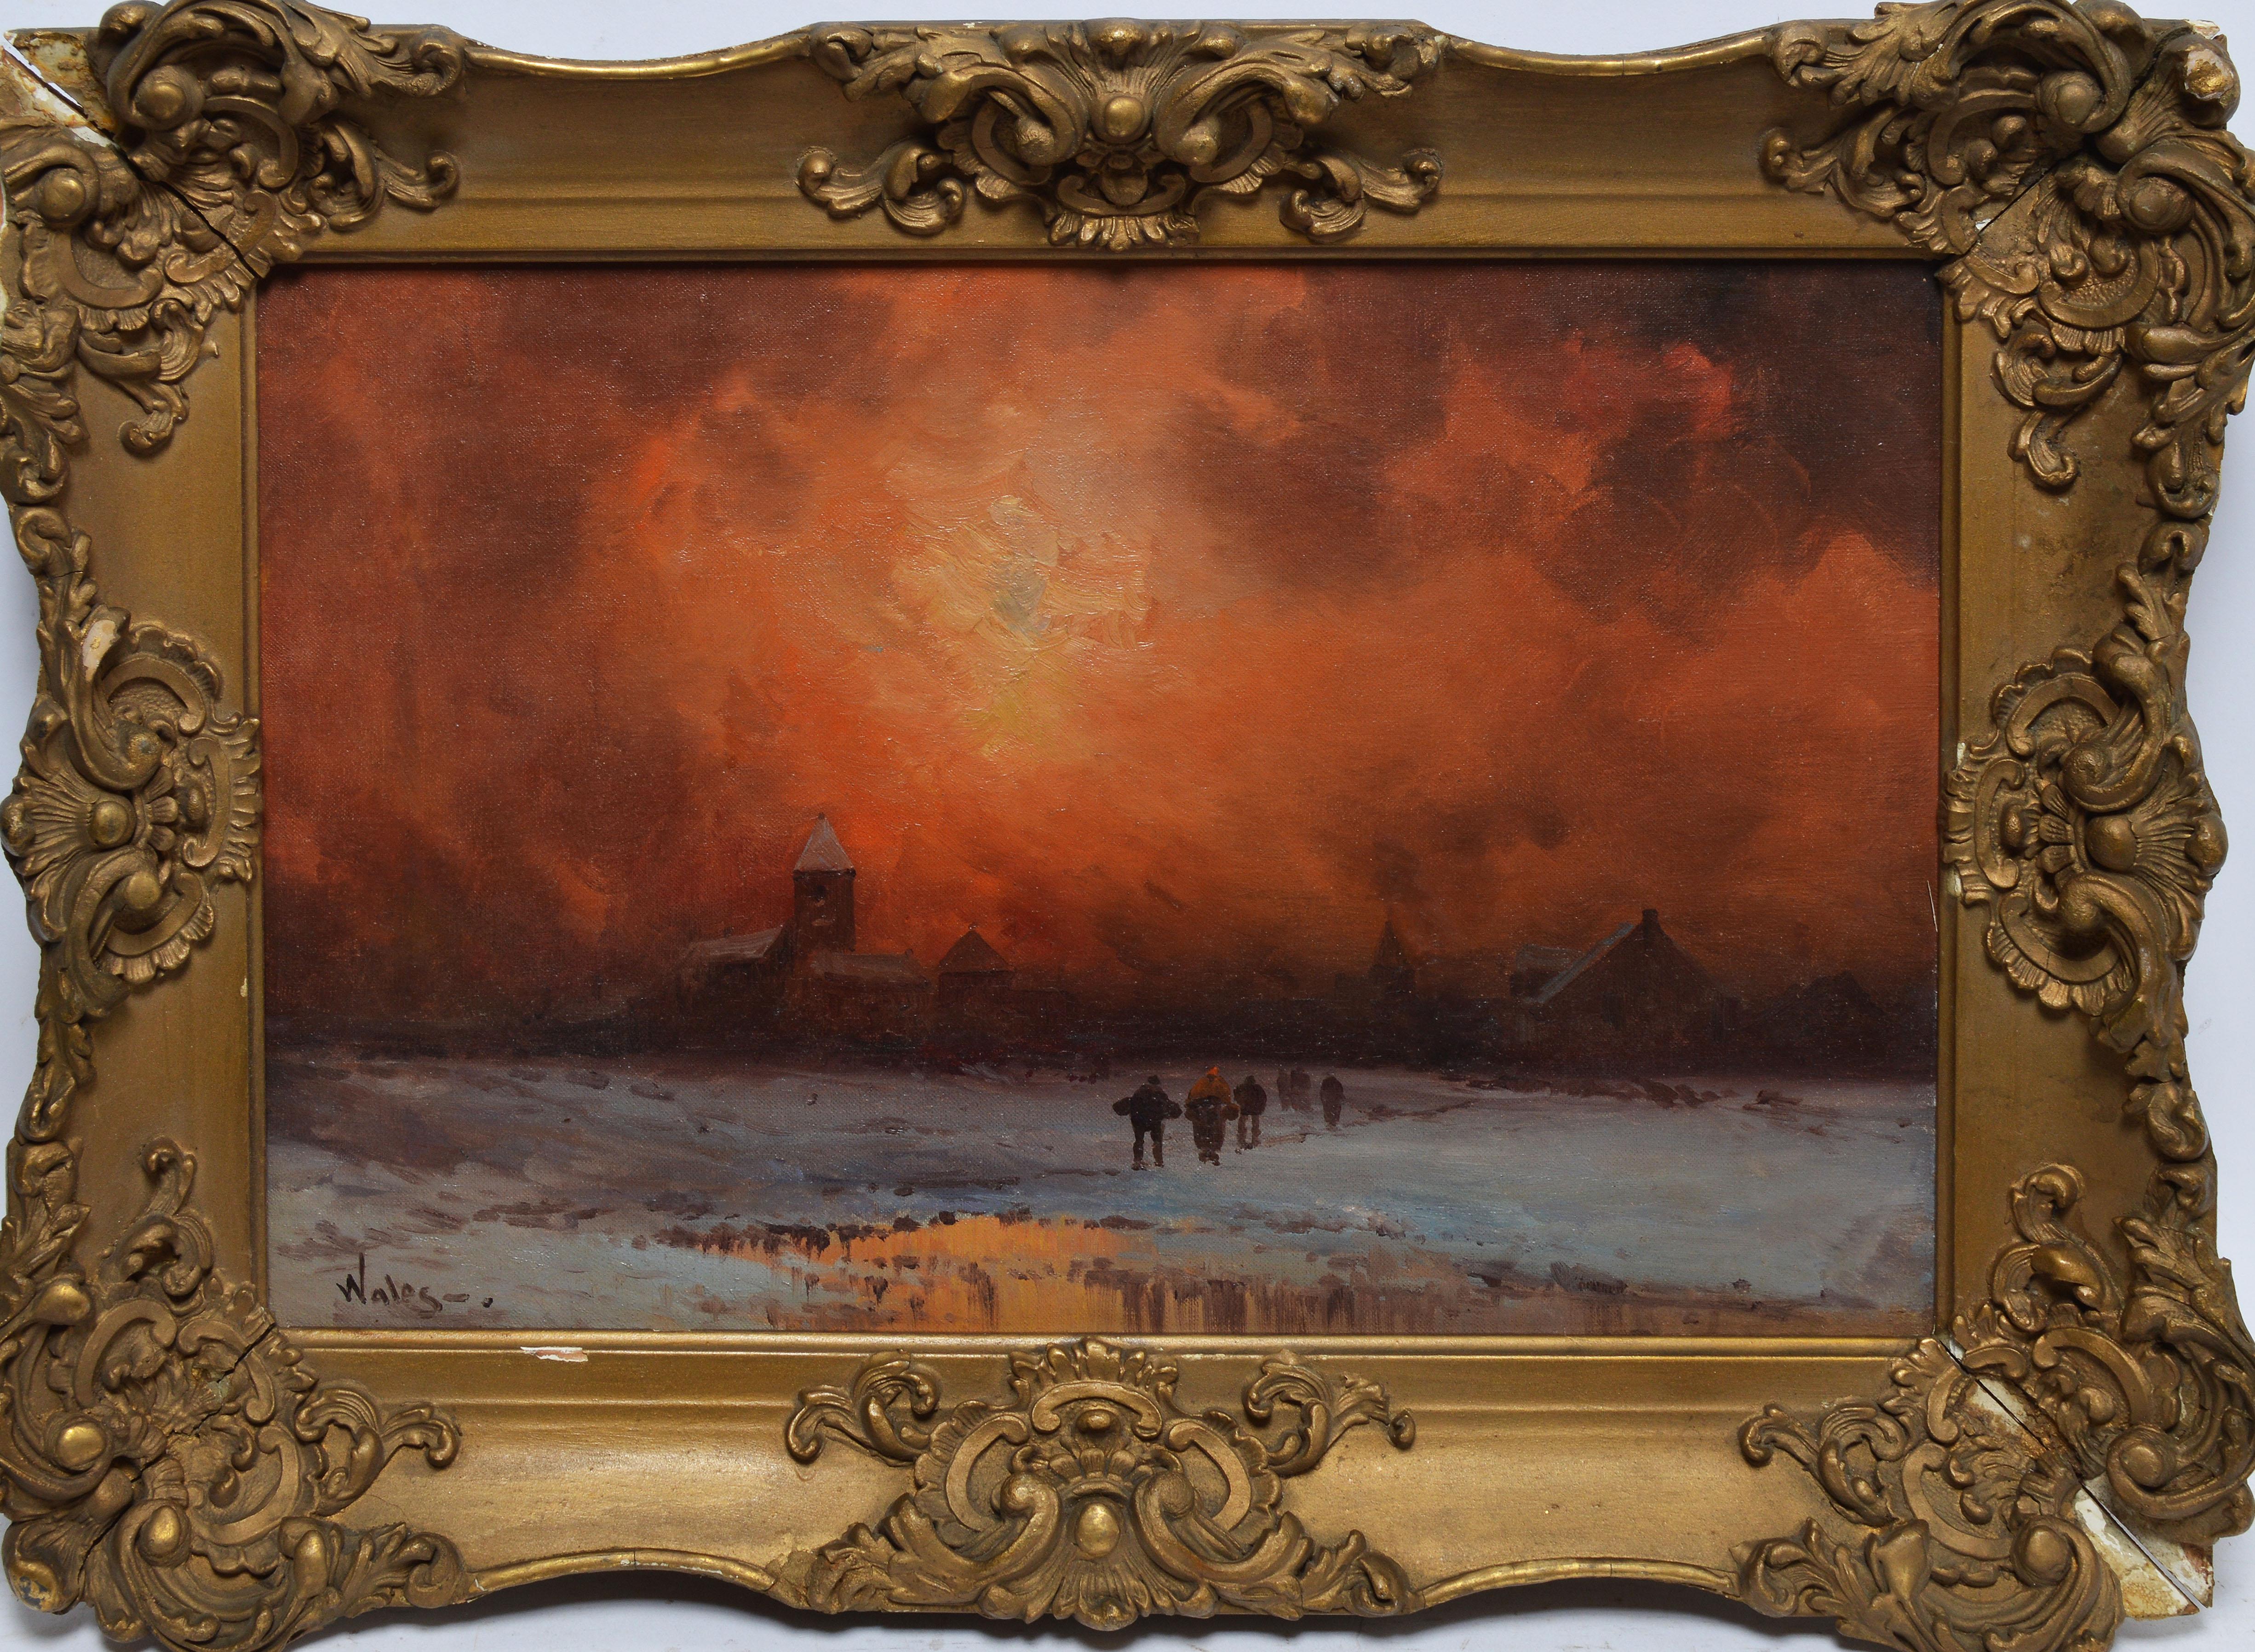 Sunset winter landscape by Orlando Wales  (1865 - 1933).  Oil on canvas, circa 1890.  Signed lower right.  Displayed in a giltwood frame.  Image size, 18"L x 12"H, overall 23"L x 16"H.